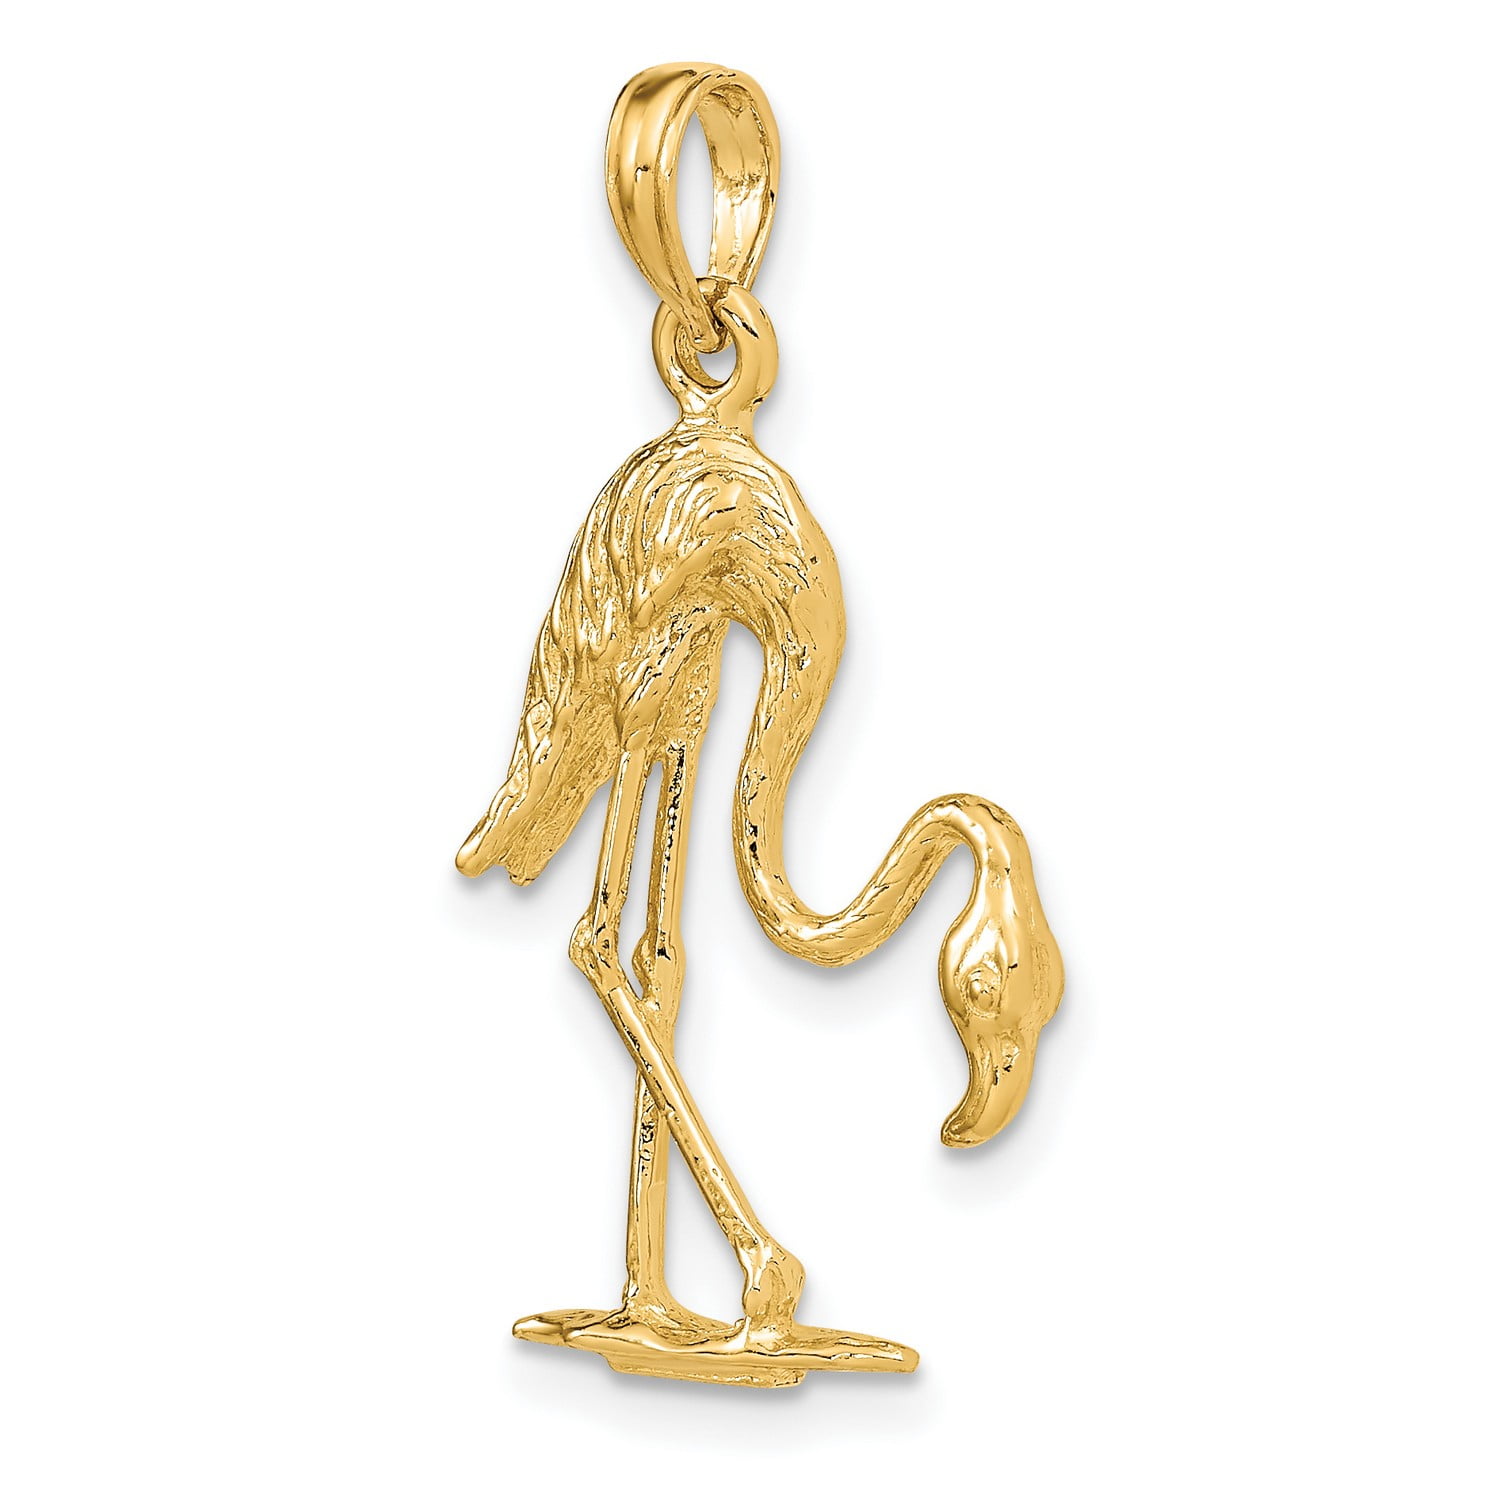 GENUINE SOLID 9ct Yellow Gold 3D STORK and BABY NEWBORN BABY CHARM/PENDANT 